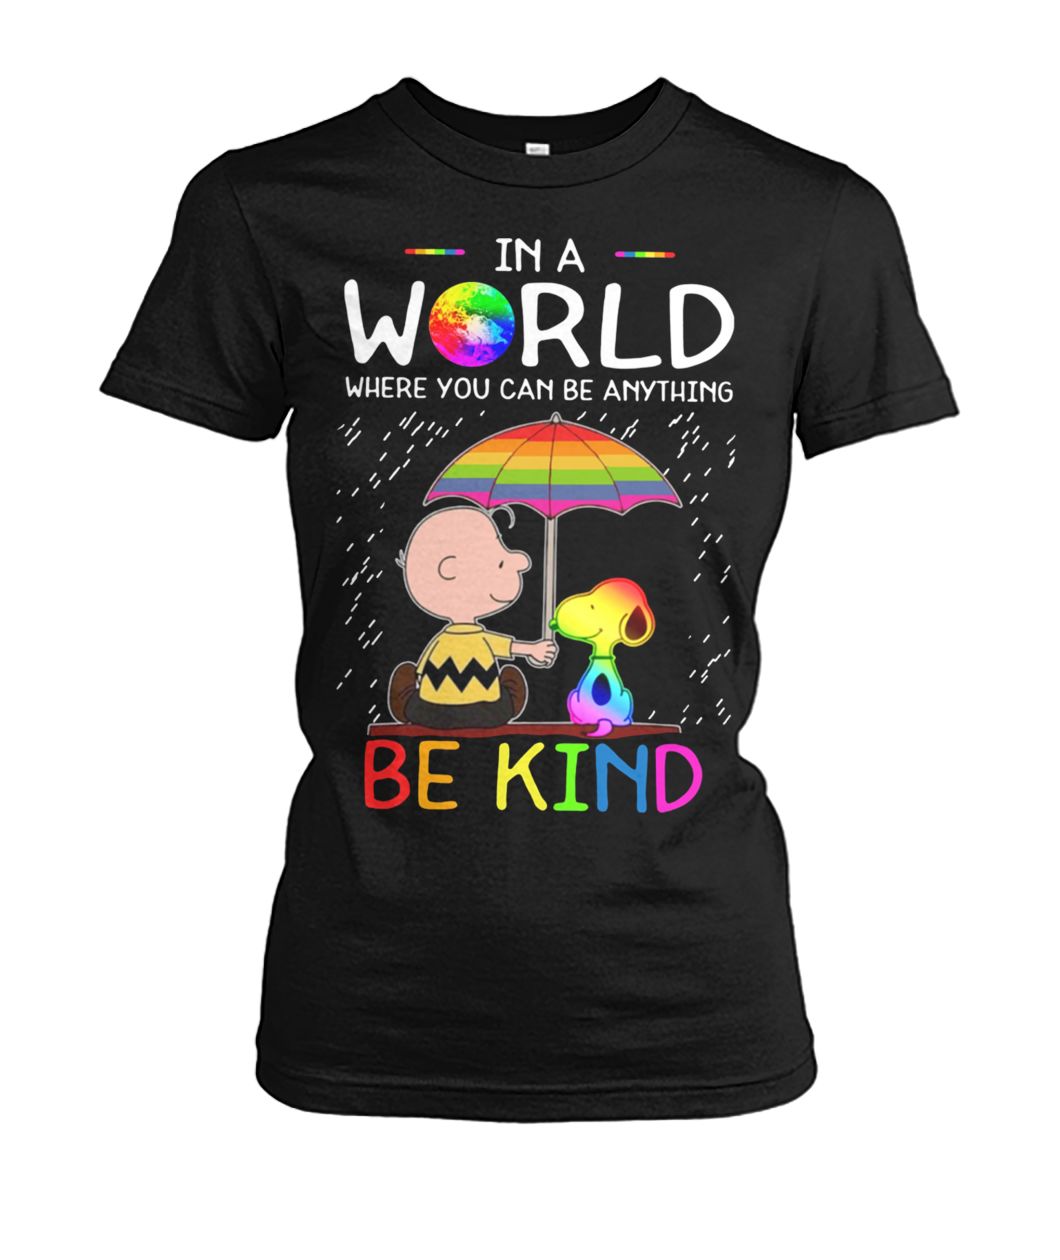 Charlie brown snoopy in a world where you can be anything be kind lgbt women's crew tee